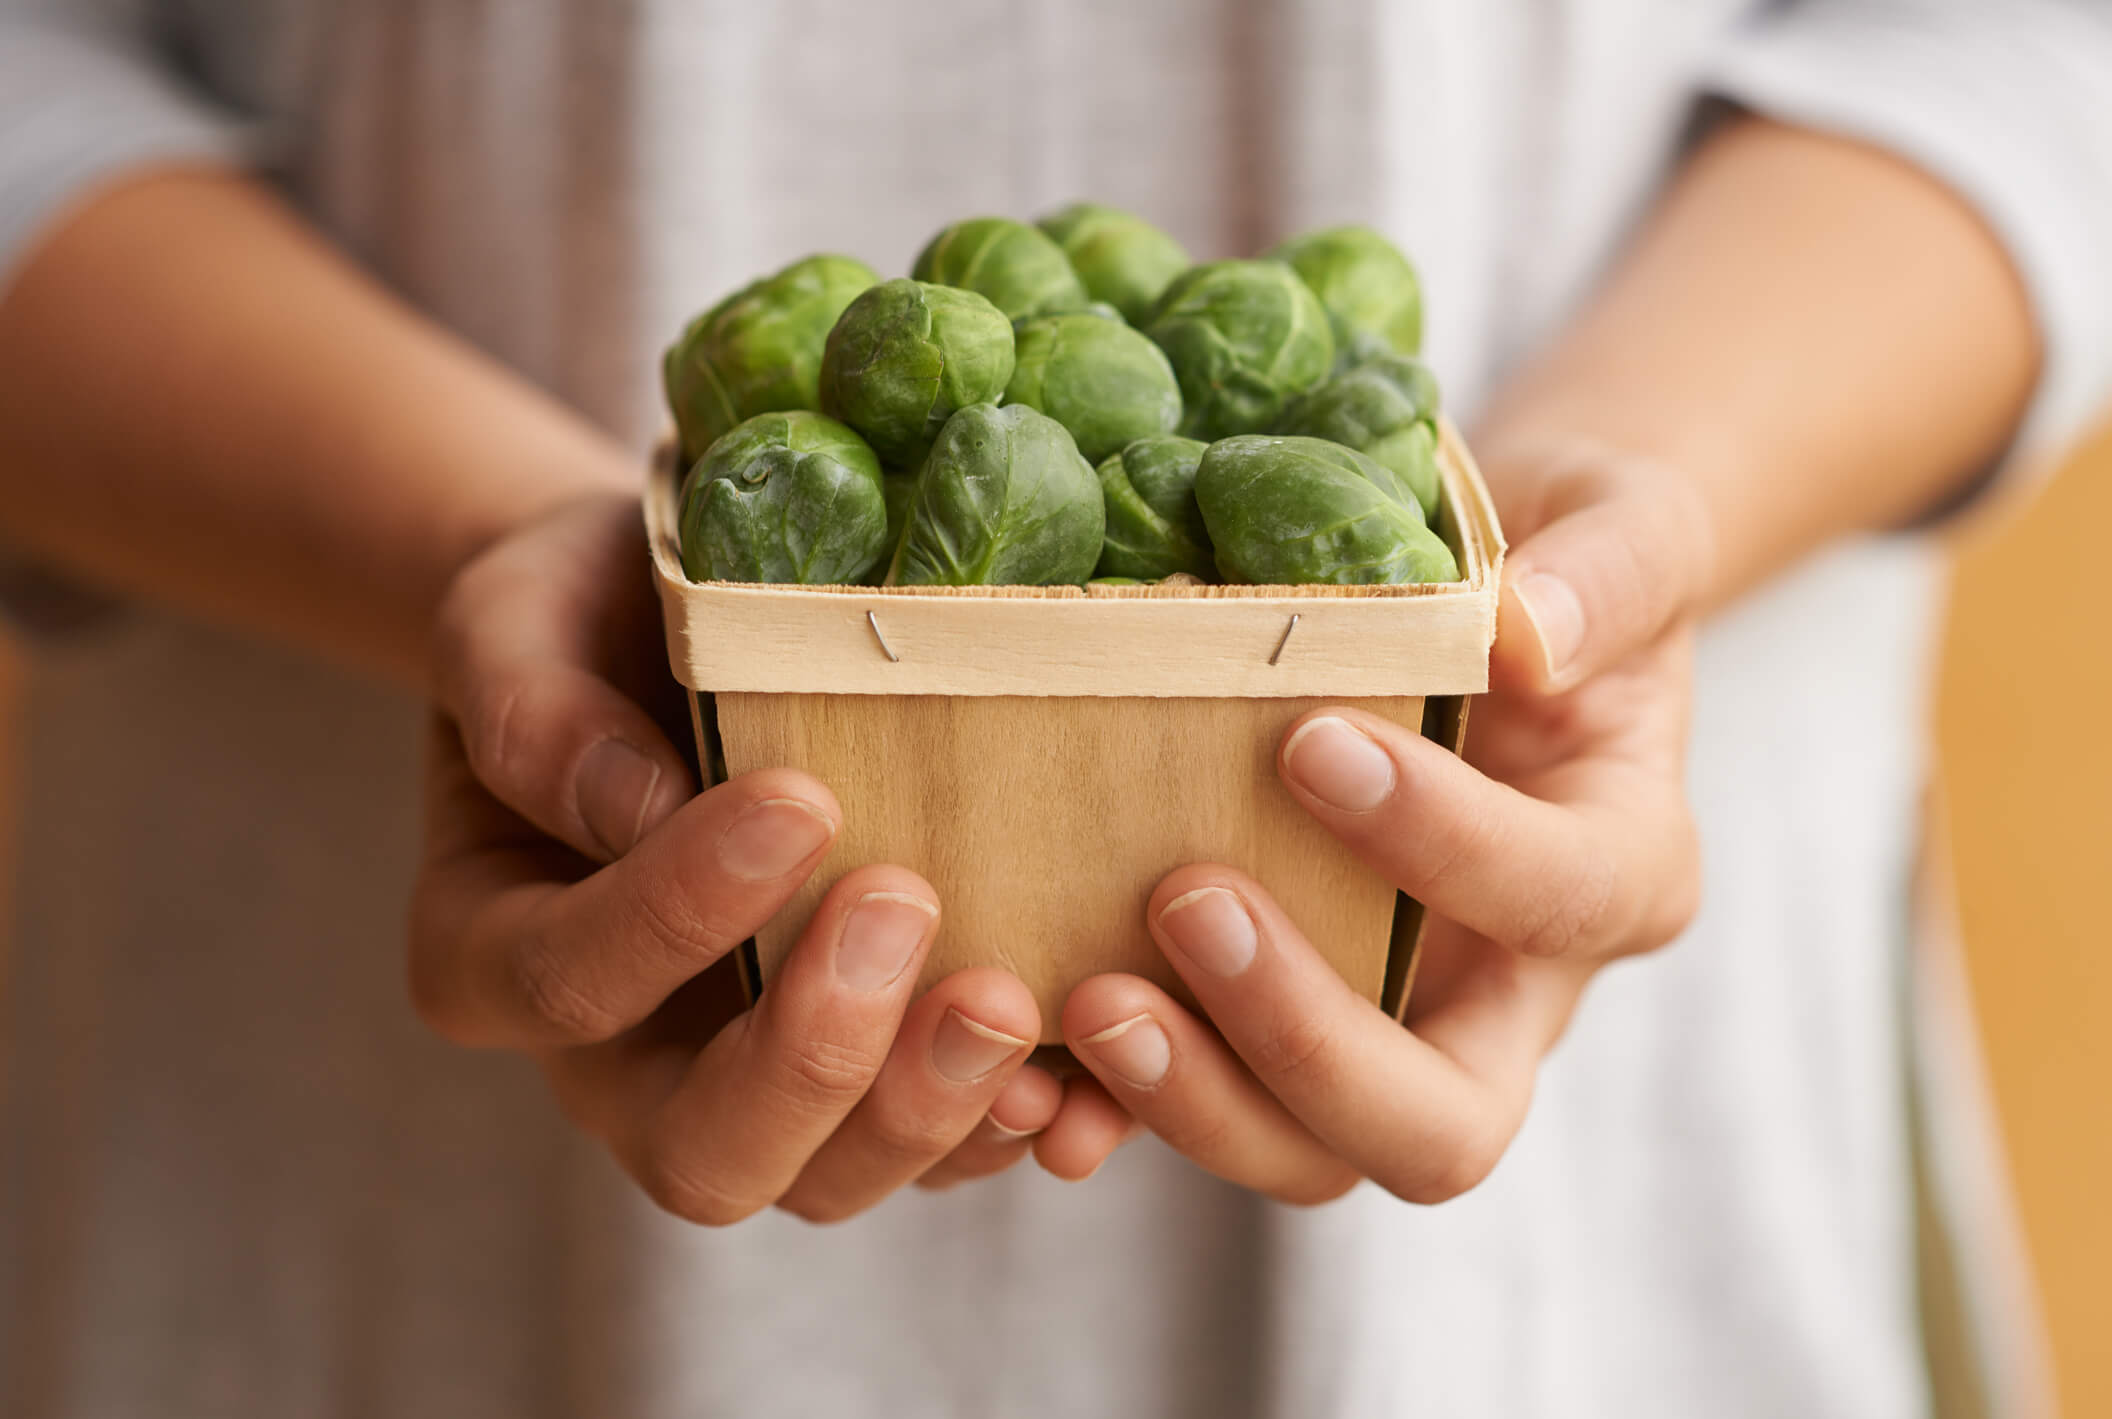 The Benefits of Brussels Sprouts (& How to Make Them Taste Good)